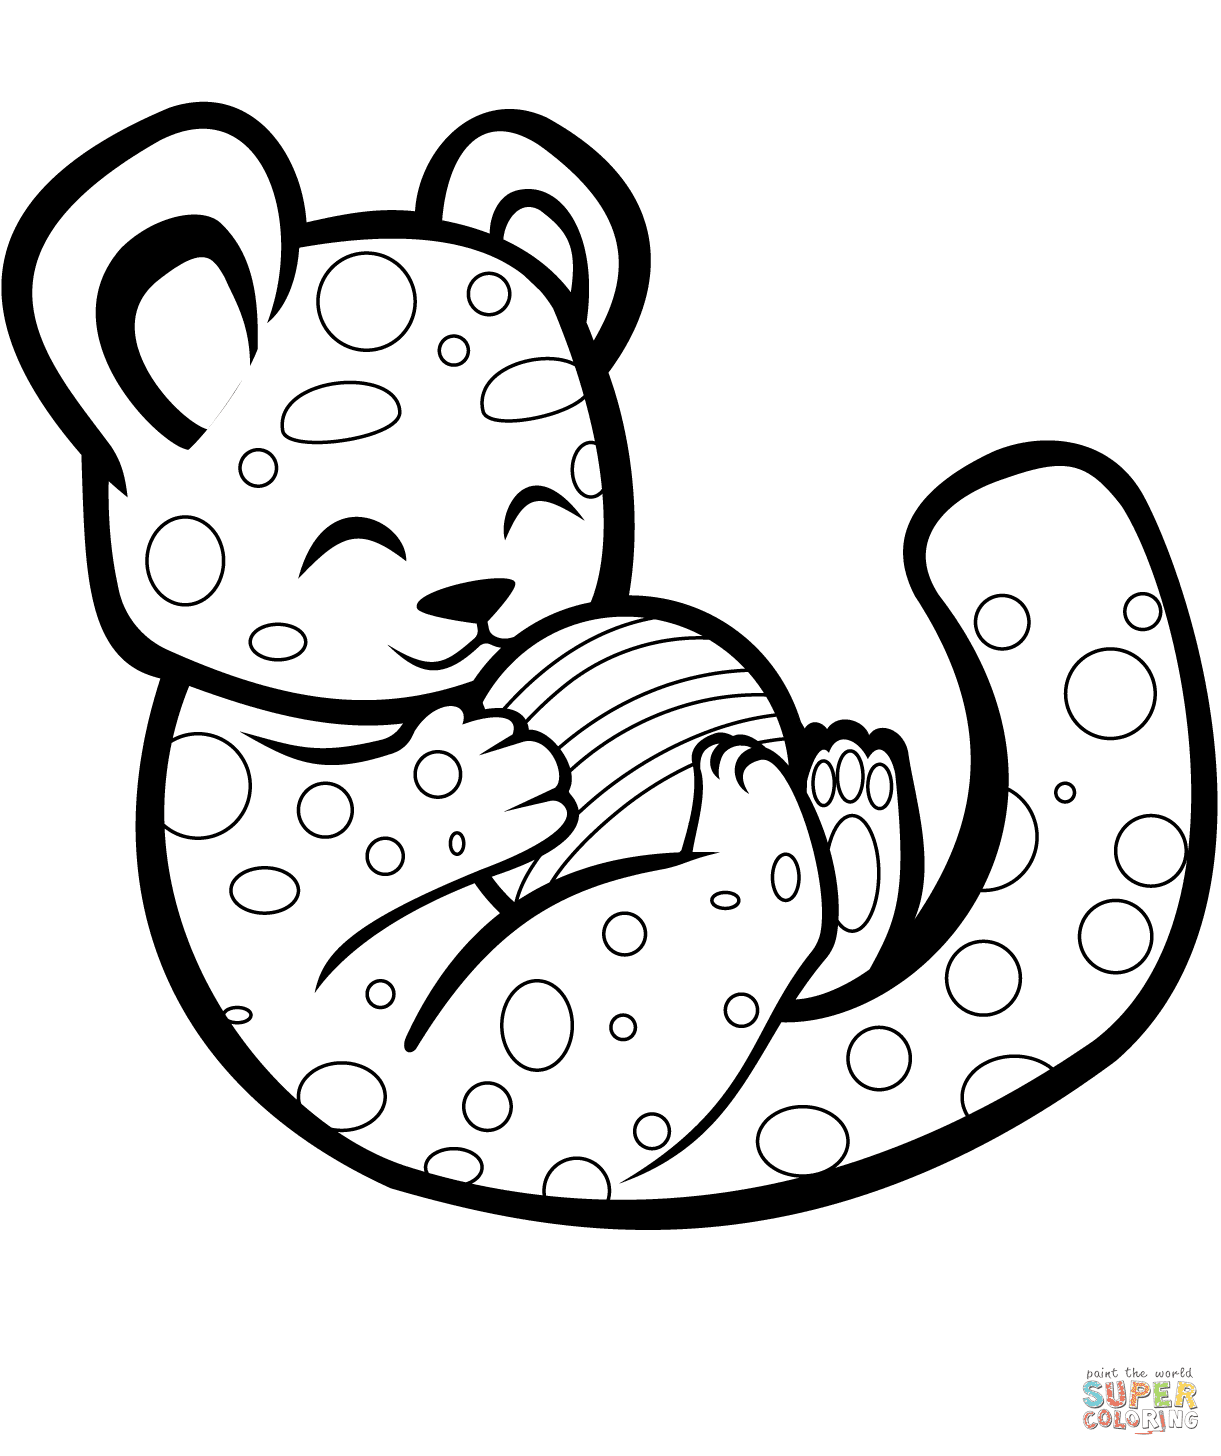 Cute Cheetah Playing with a Ball Coloring Pages